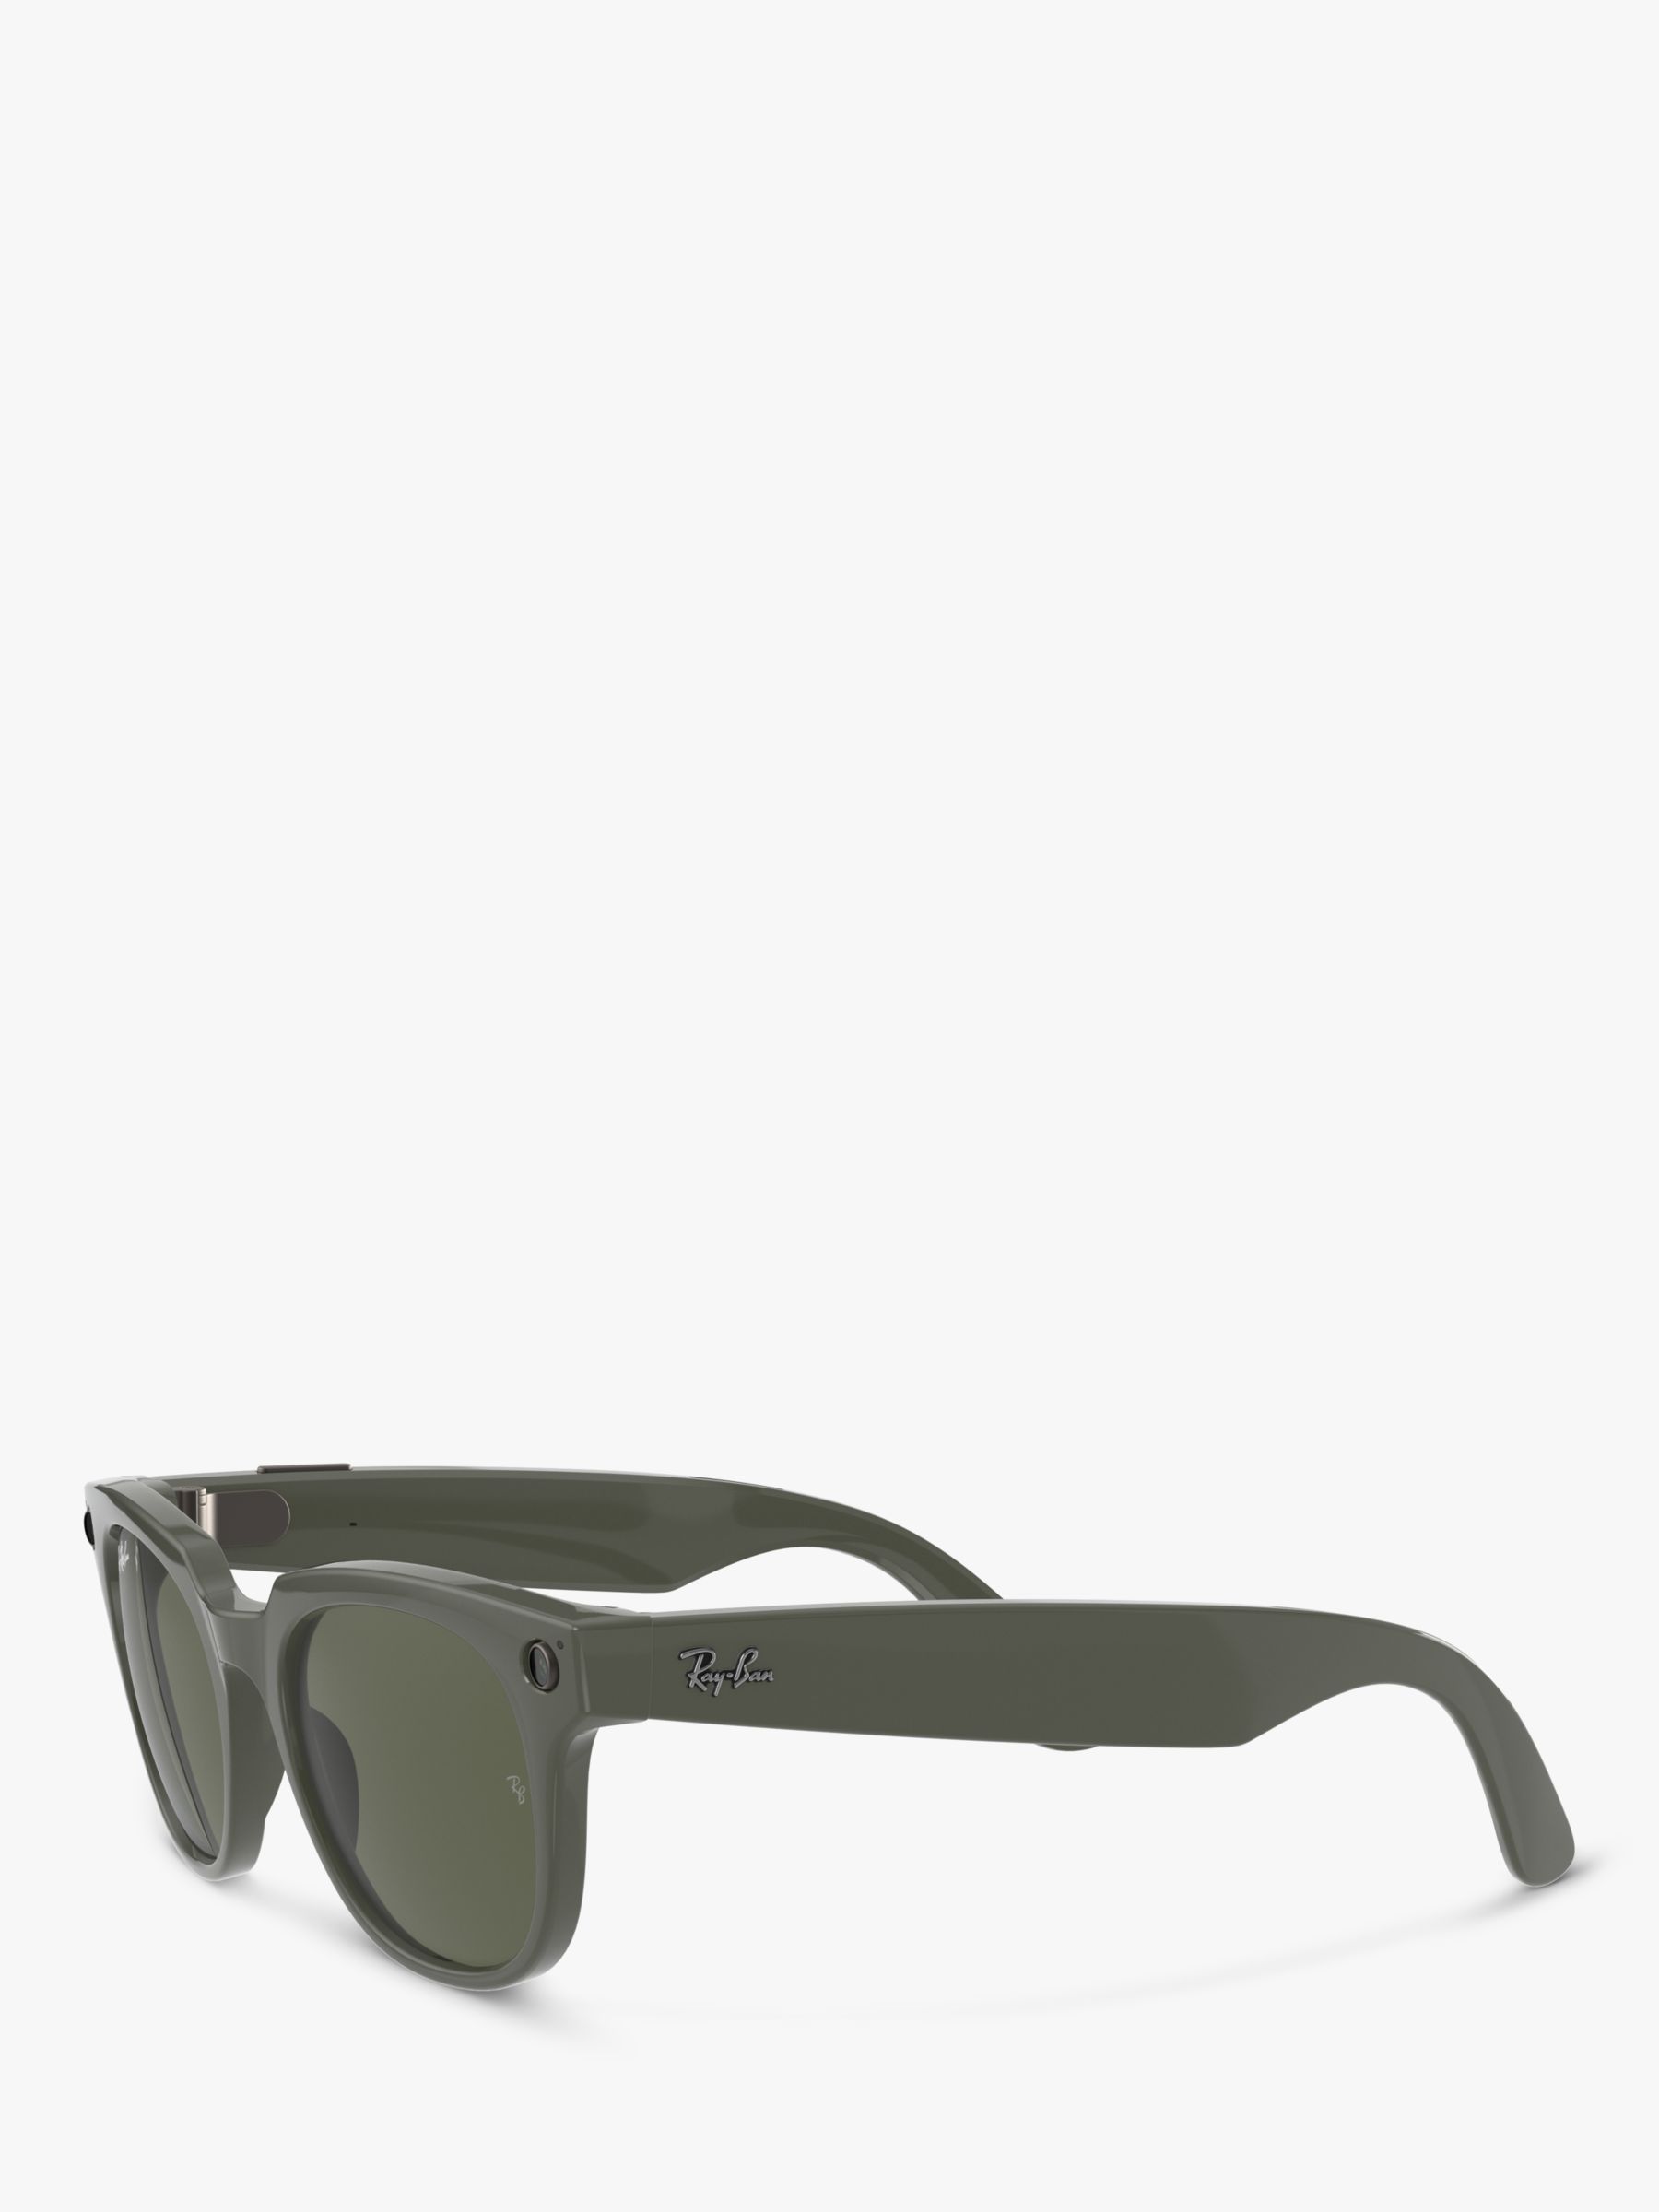 Ray-Ban Stories Meteor Square Smart Sunglasses, Shiny Olive/Green 15 at  John Lewis & Partners